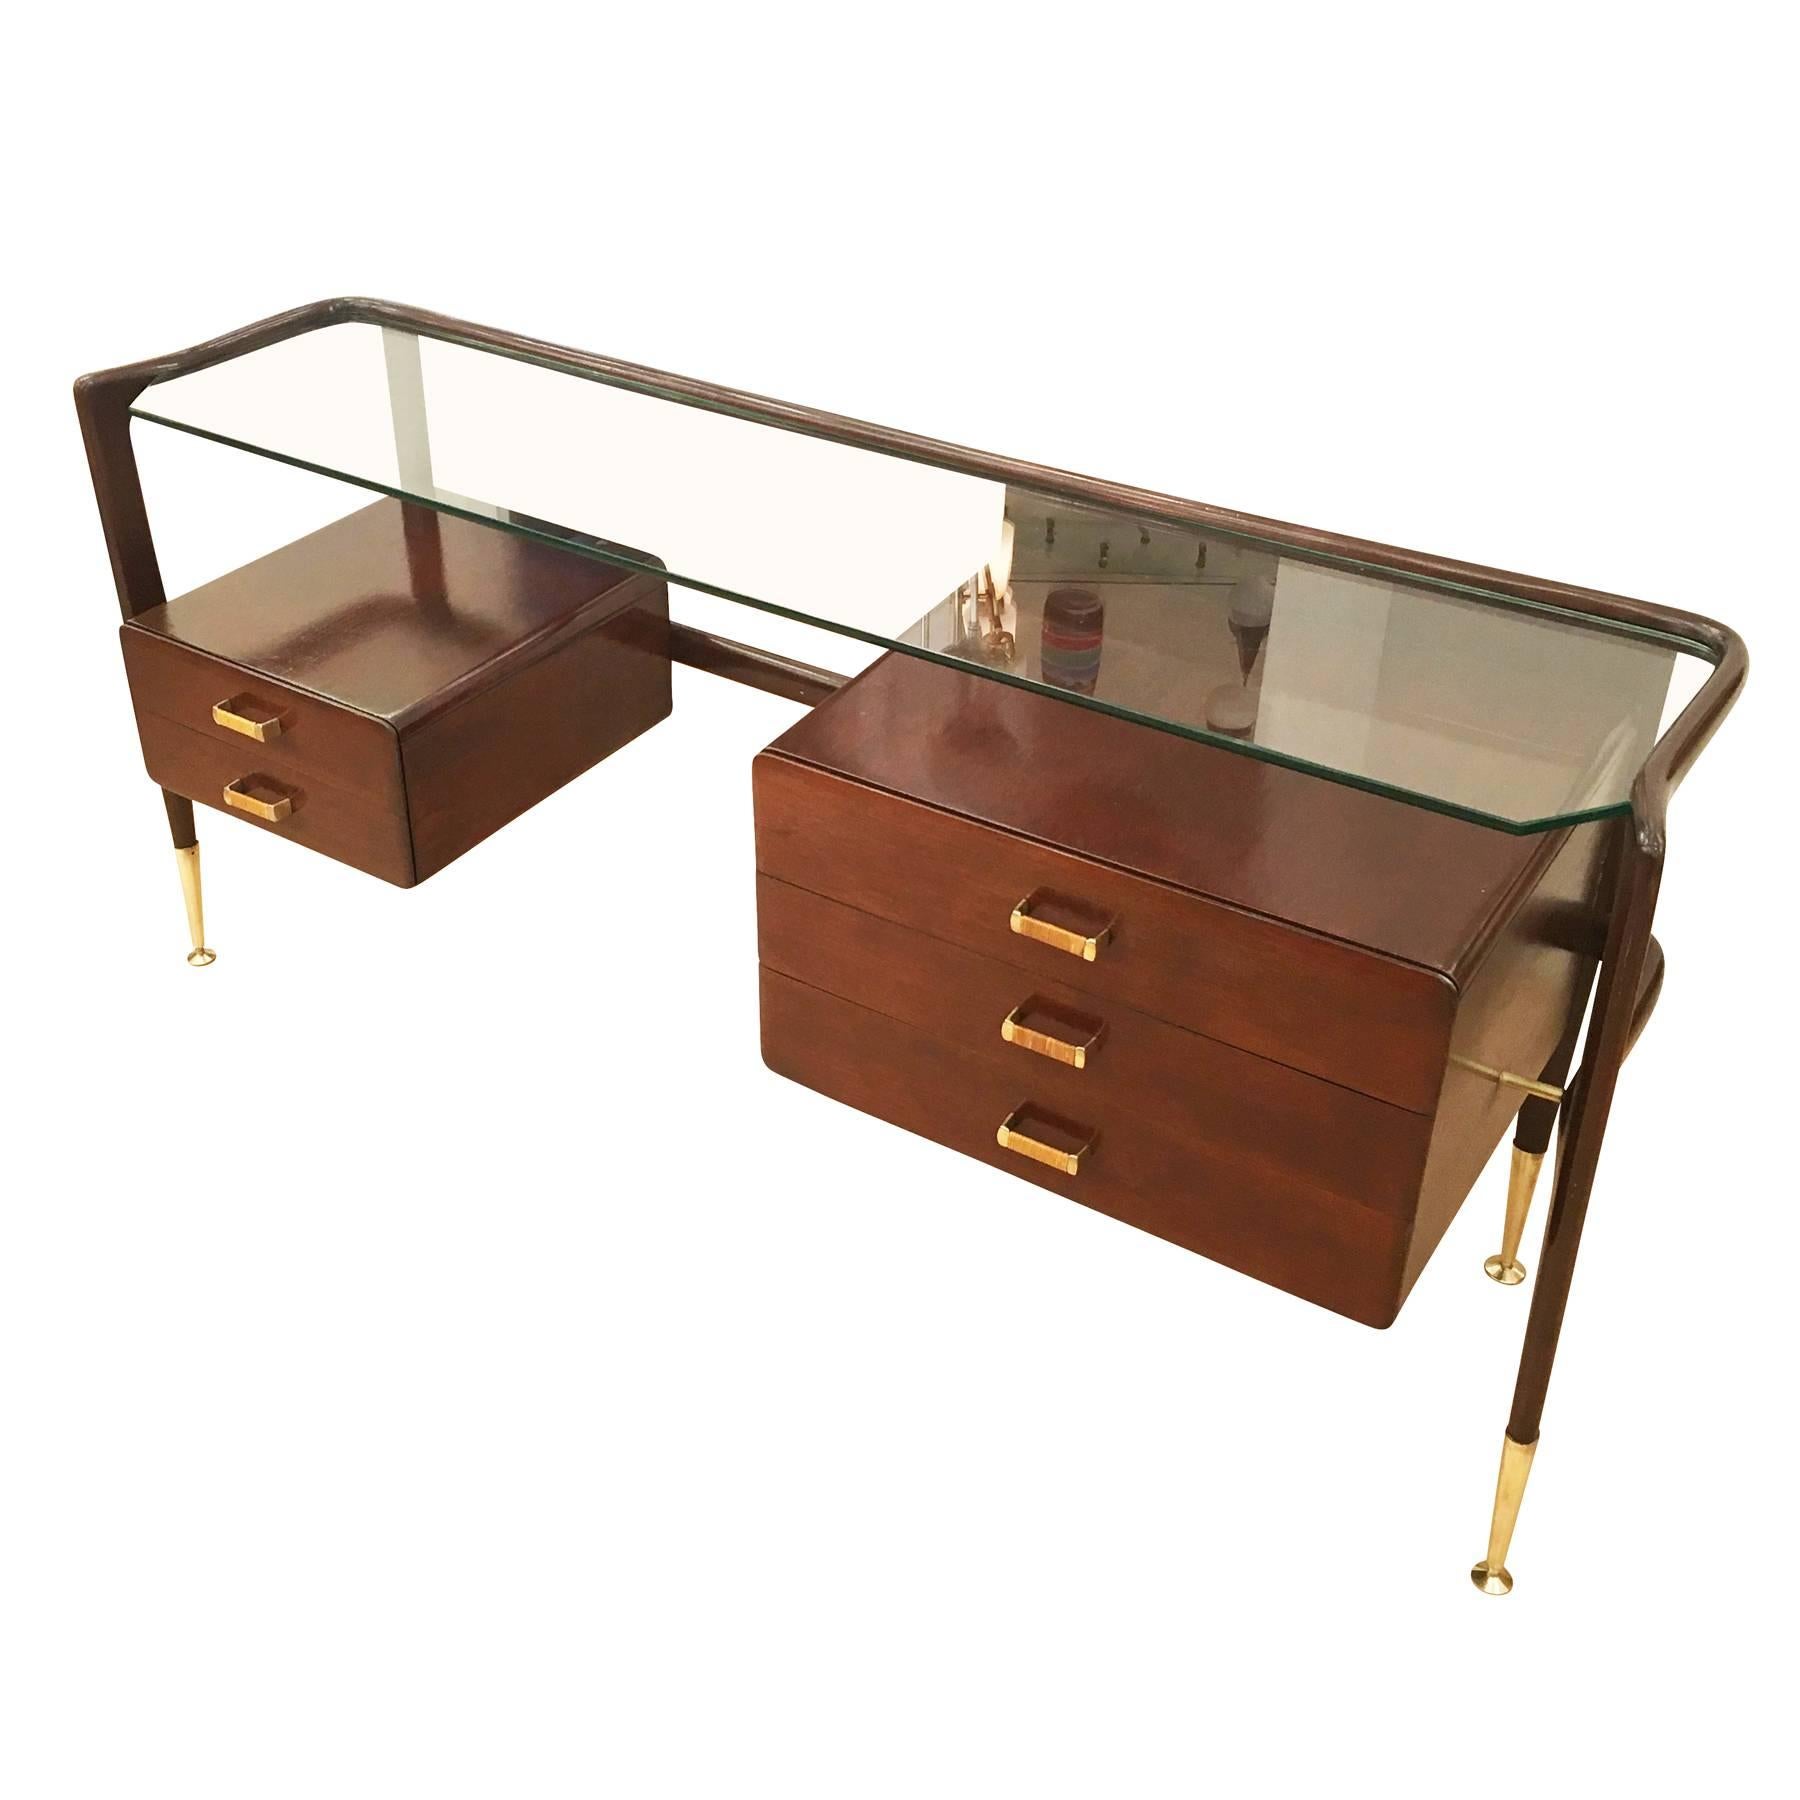 Elegant Italian Mid-Century piece that can be used as a console or a shallow desk. It is made in rosewood had has a glass top and brass fittings.